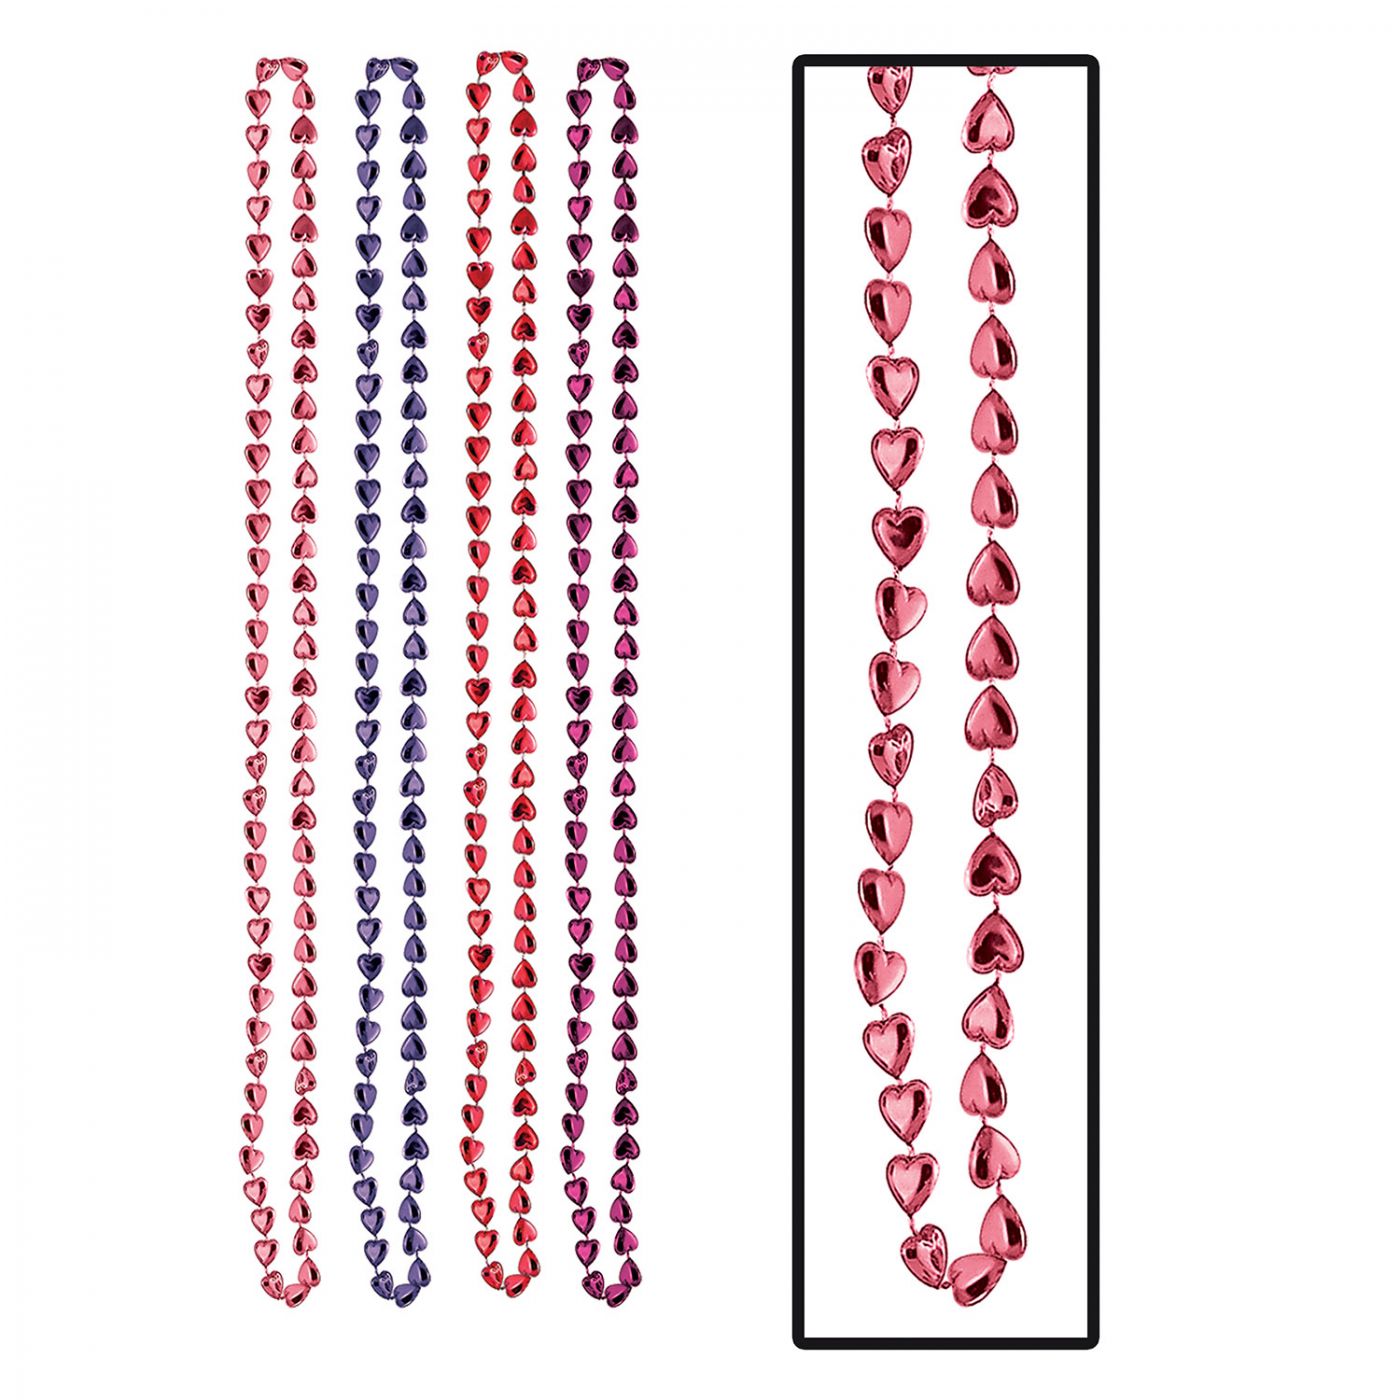 Image of Candy Heart Beads (12)